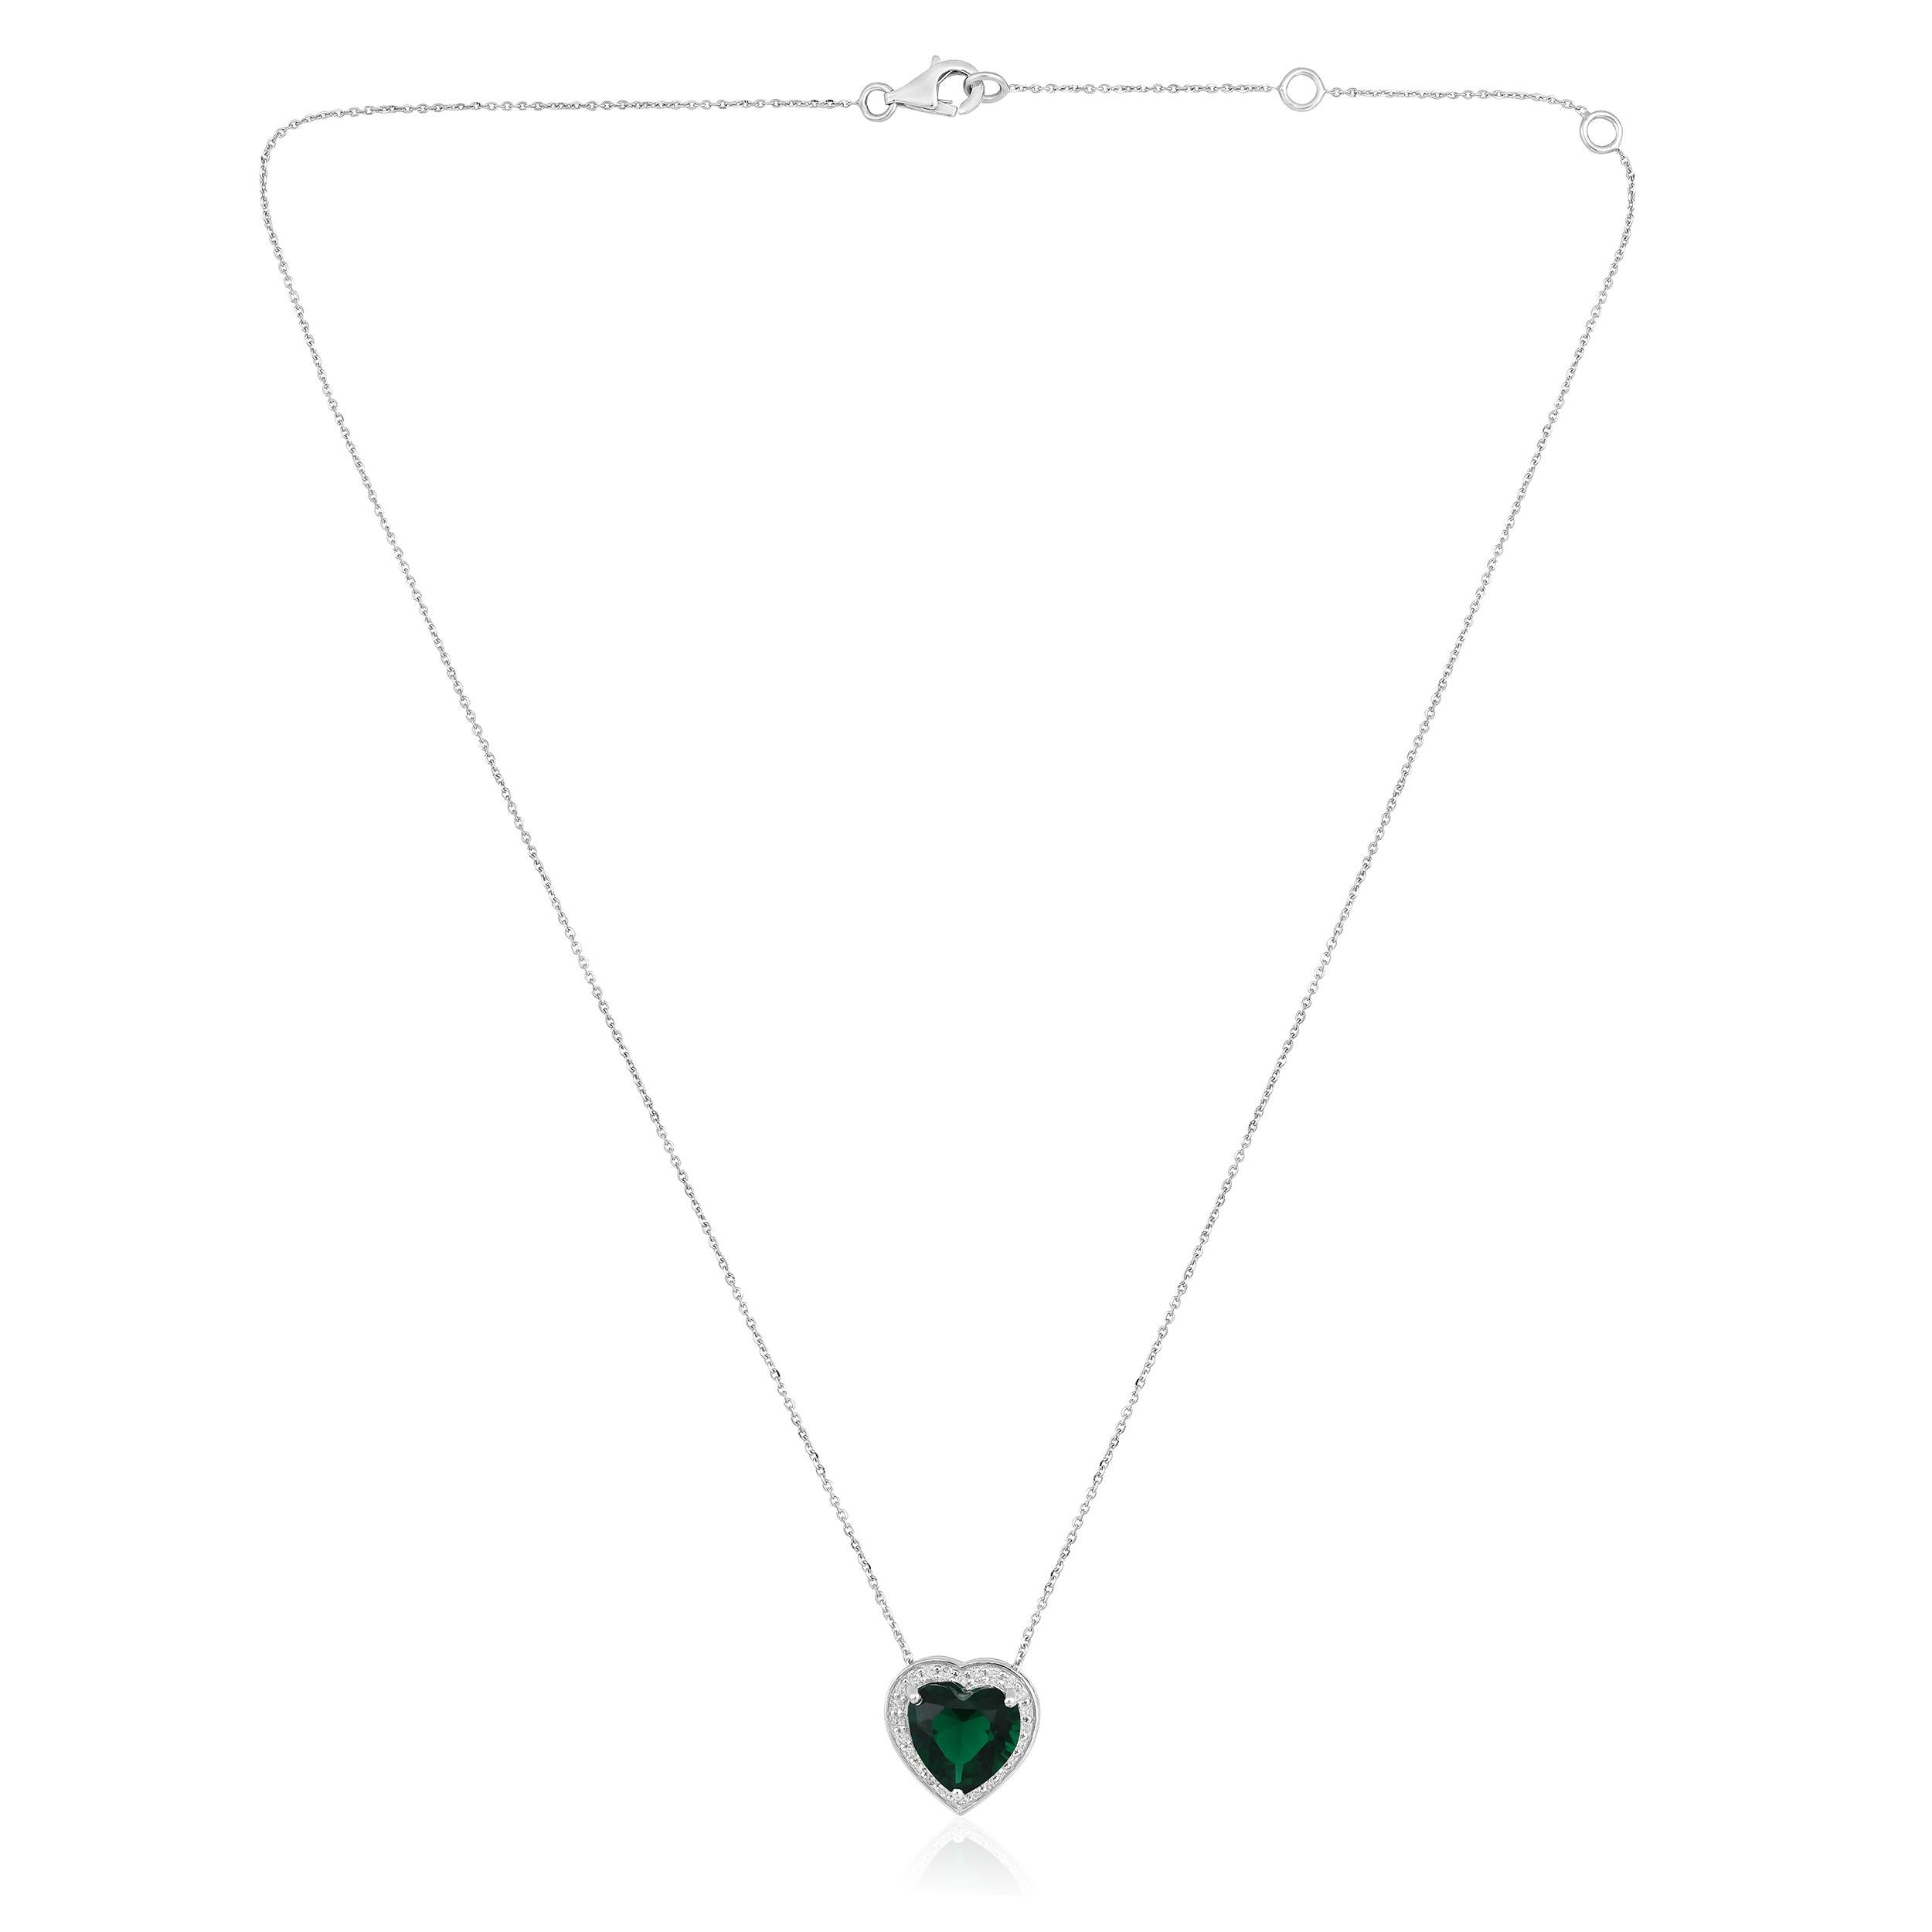 Crafted in 3.24 grams of 14K White Gold, the necklace contains 24 stones of Round Diamonds with a total of 0.21 carat in F-G color and I1-I2 clarity combined with 1 stone of Lab Created Emerald Gemstone with a total of 1.97 carat. The necklace